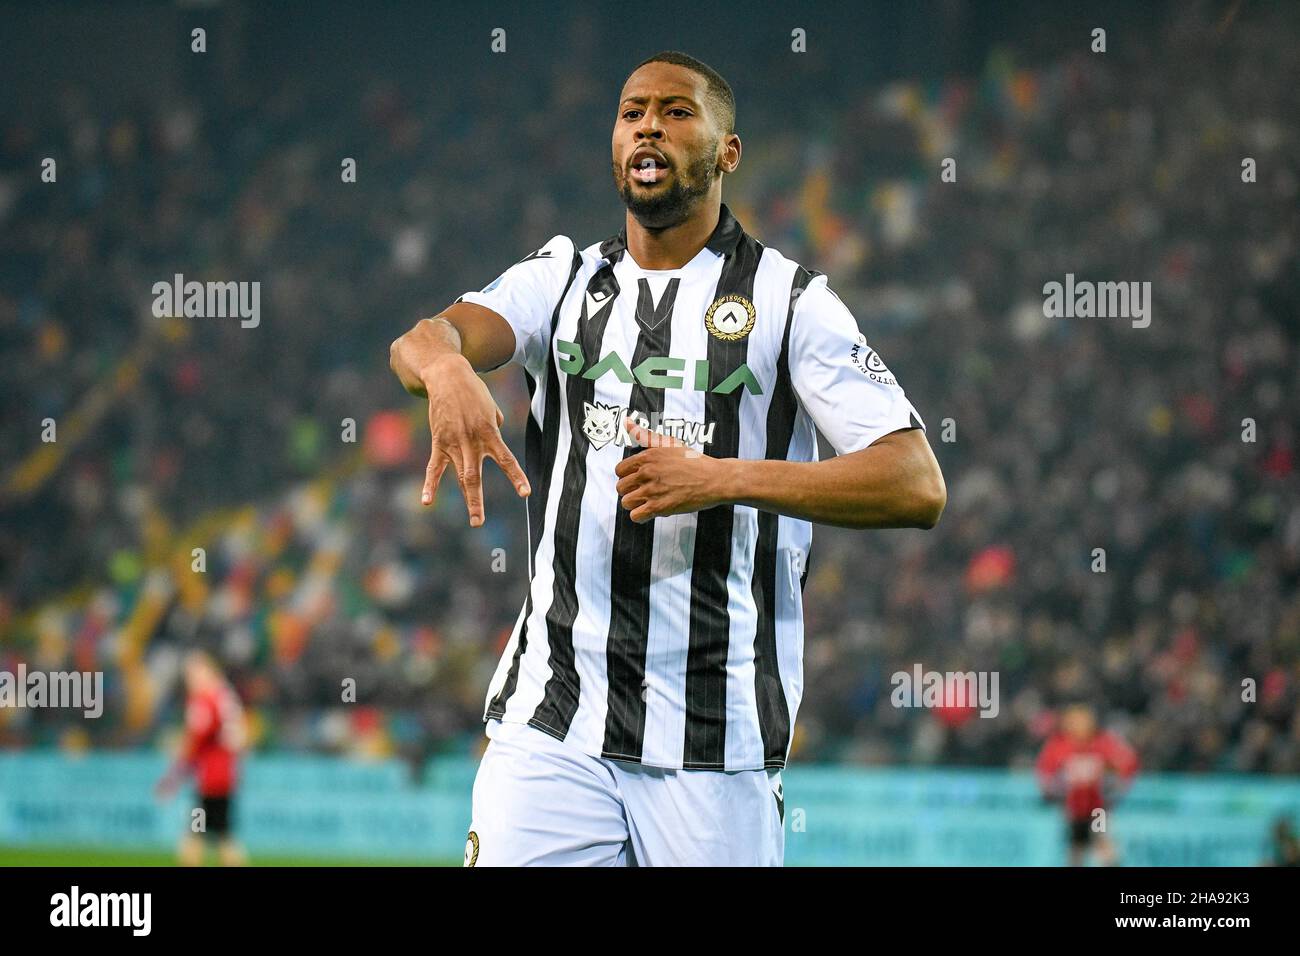 Udine, Italy. 11th Dec, 2021. Udinese's Norberto Bercique Gomes Betuncal celebrates after scoring a goal 1-0 during Udinese Calcio vs AC Milan, italian soccer Serie A match in Udine, Italy, December 11 2021 Credit: Independent Photo Agency/Alamy Live News Stock Photo